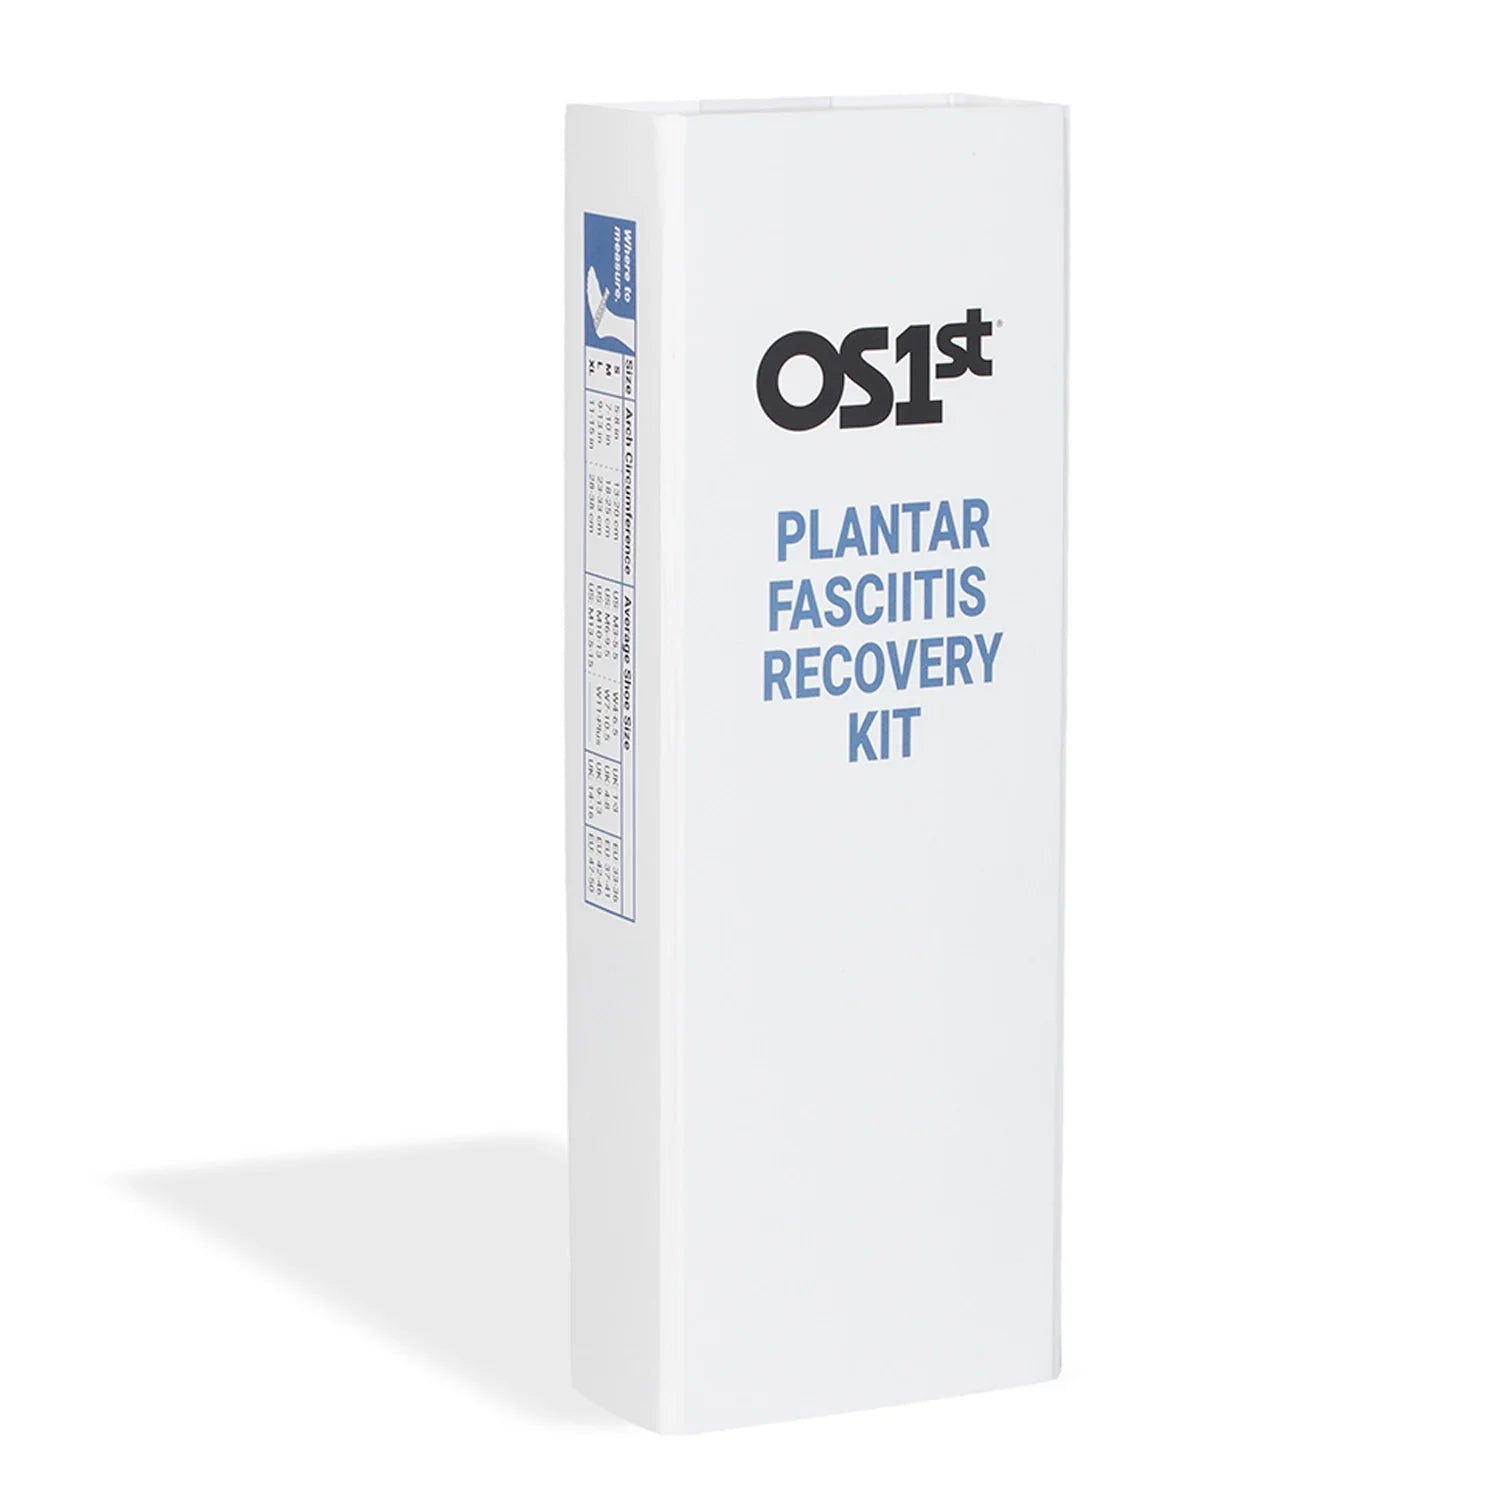 OS1st Plantar Fasciitis Recovery Kit in  by GOHUNT | OS1st - GOHUNT Shop